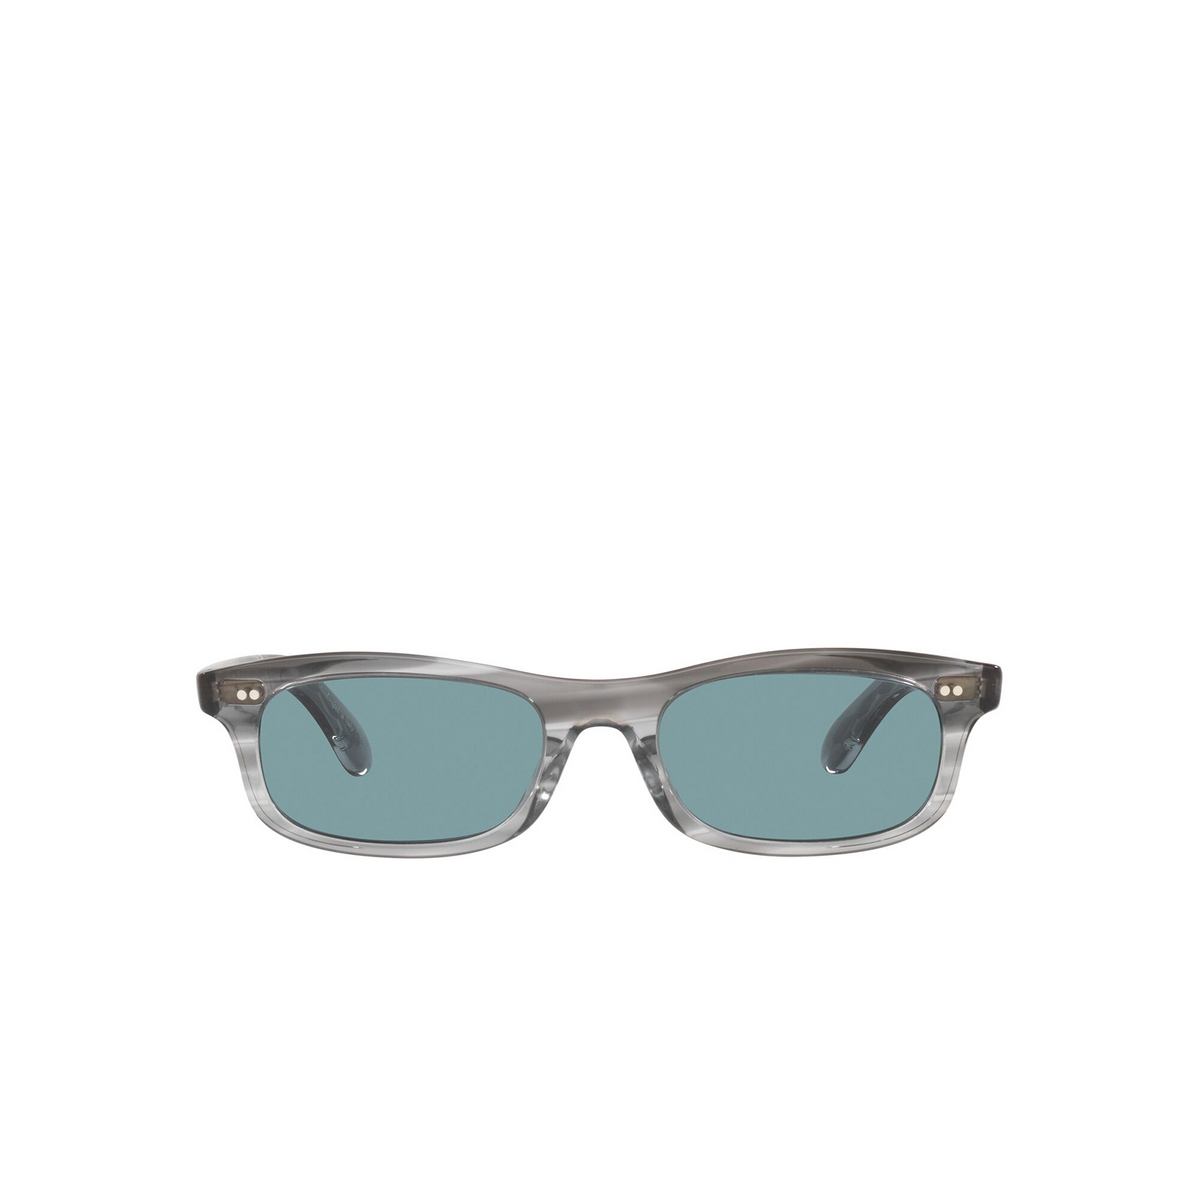 Oliver Peoples® Rectangle Sunglasses: Fai OV5484SU color Grey Textured Tortoise 1737P1 - front view.